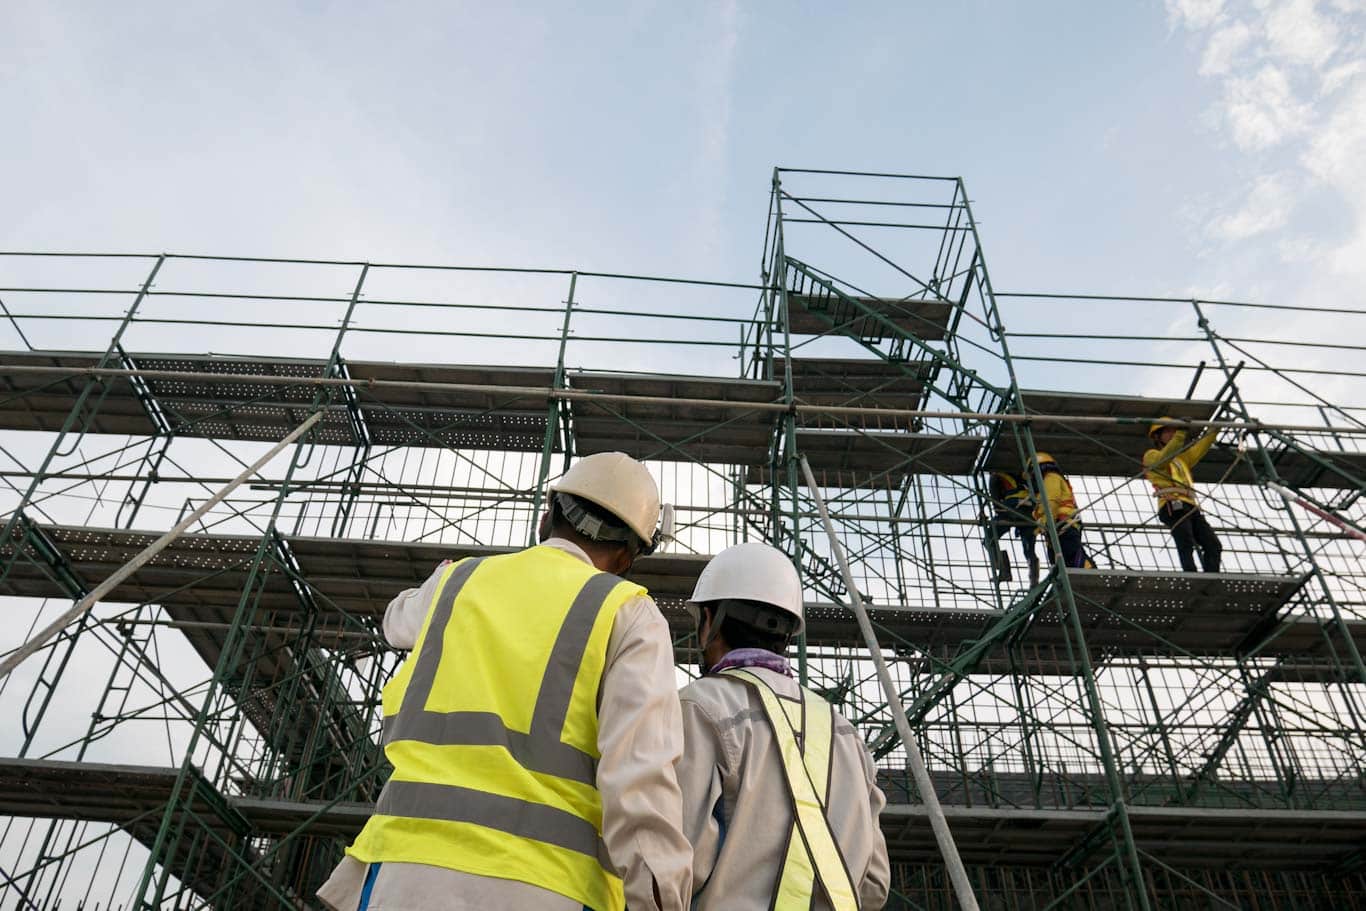 Scaffold inspection is vital to worker safety.